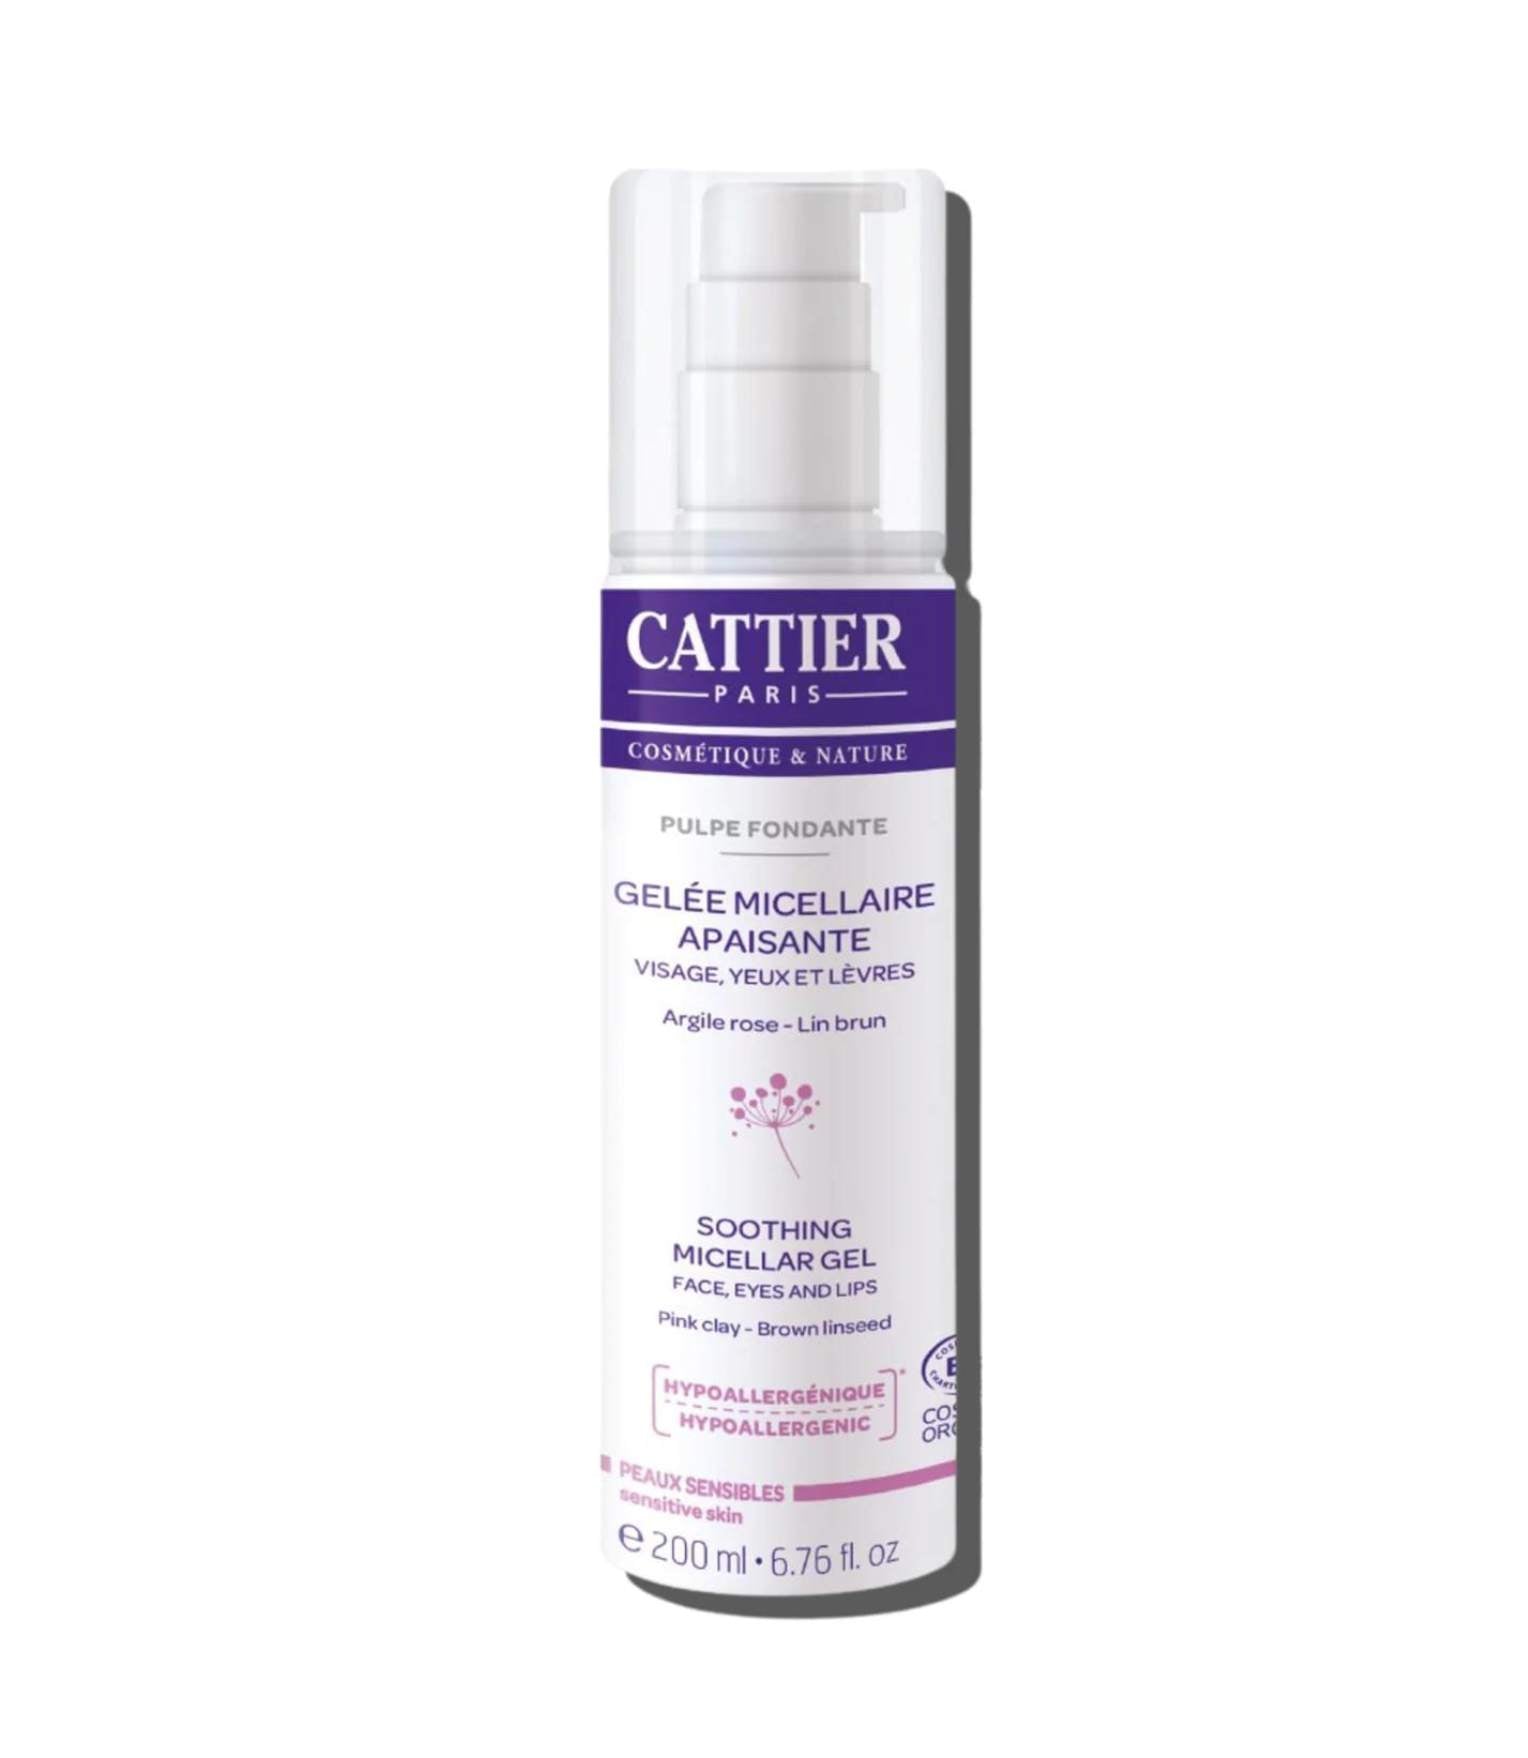 Soothing Micellar Gel for Sensitive Skin 200ml when you spend $89 on Cattier - French Beauty Co.